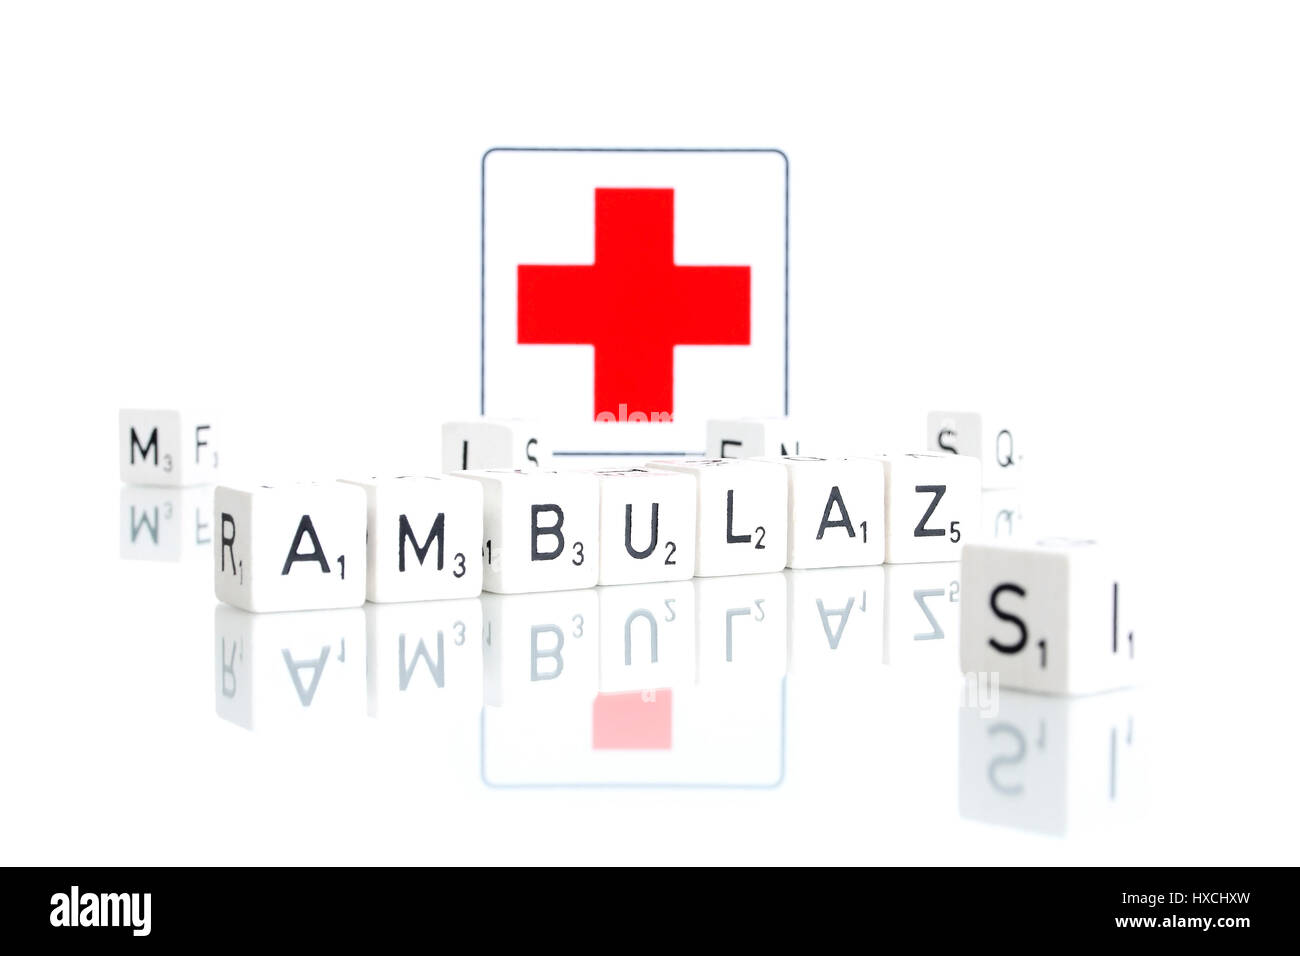 Outpatient clinic, Ambulanz Stock Photo